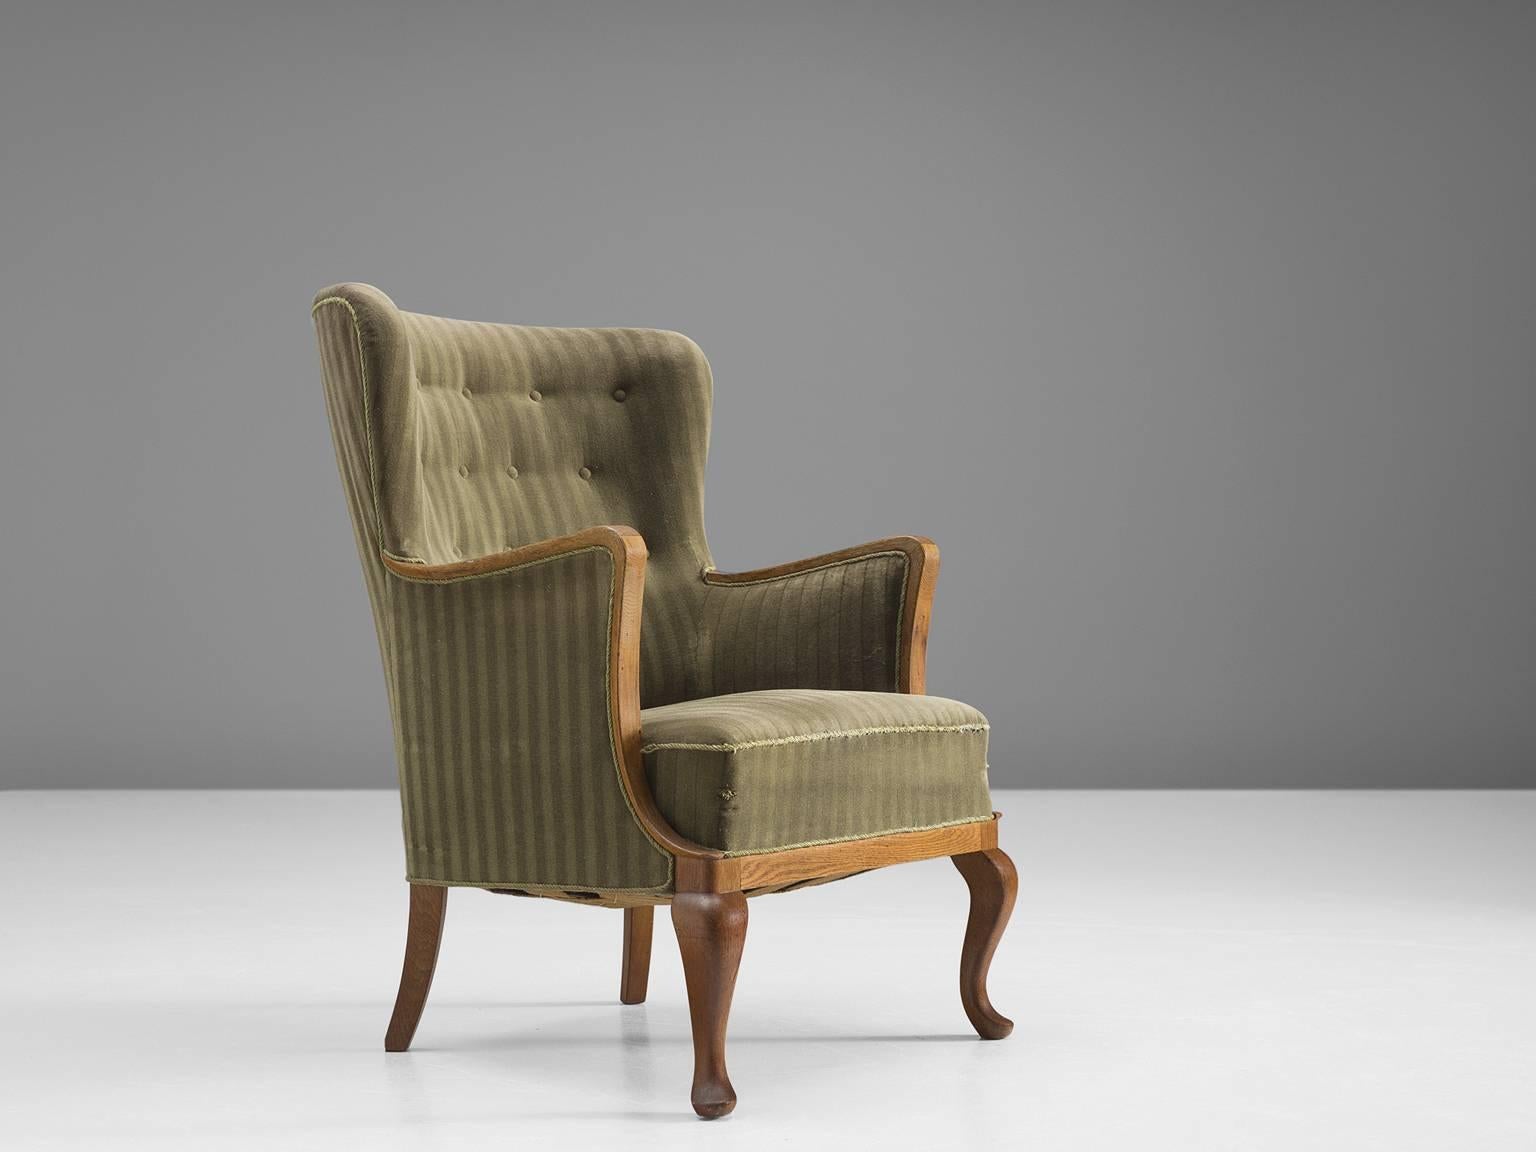 Armchair, green and wood, Denmark, 1950s.

This stately and comfortable wingback chair holds the middle between Classic wingback chairs and Scandinavian Modern design. The legs and armrests are executed in wood whereas the rest of the chair is